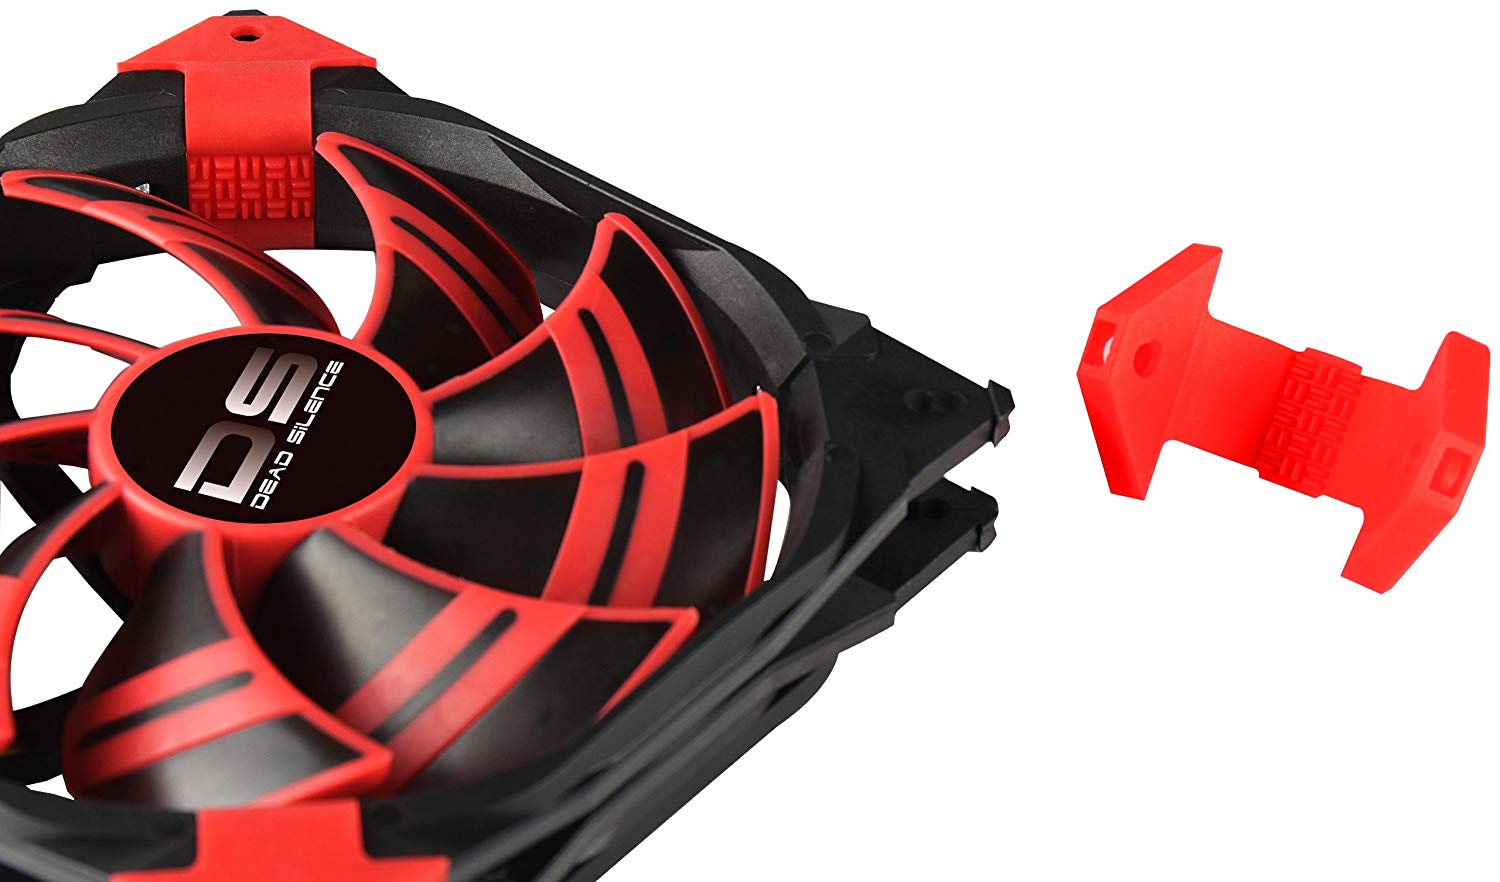 For sale Silverstone Platinum 700w SFX-L Power Supply +140mm Pressure Red LED Fan